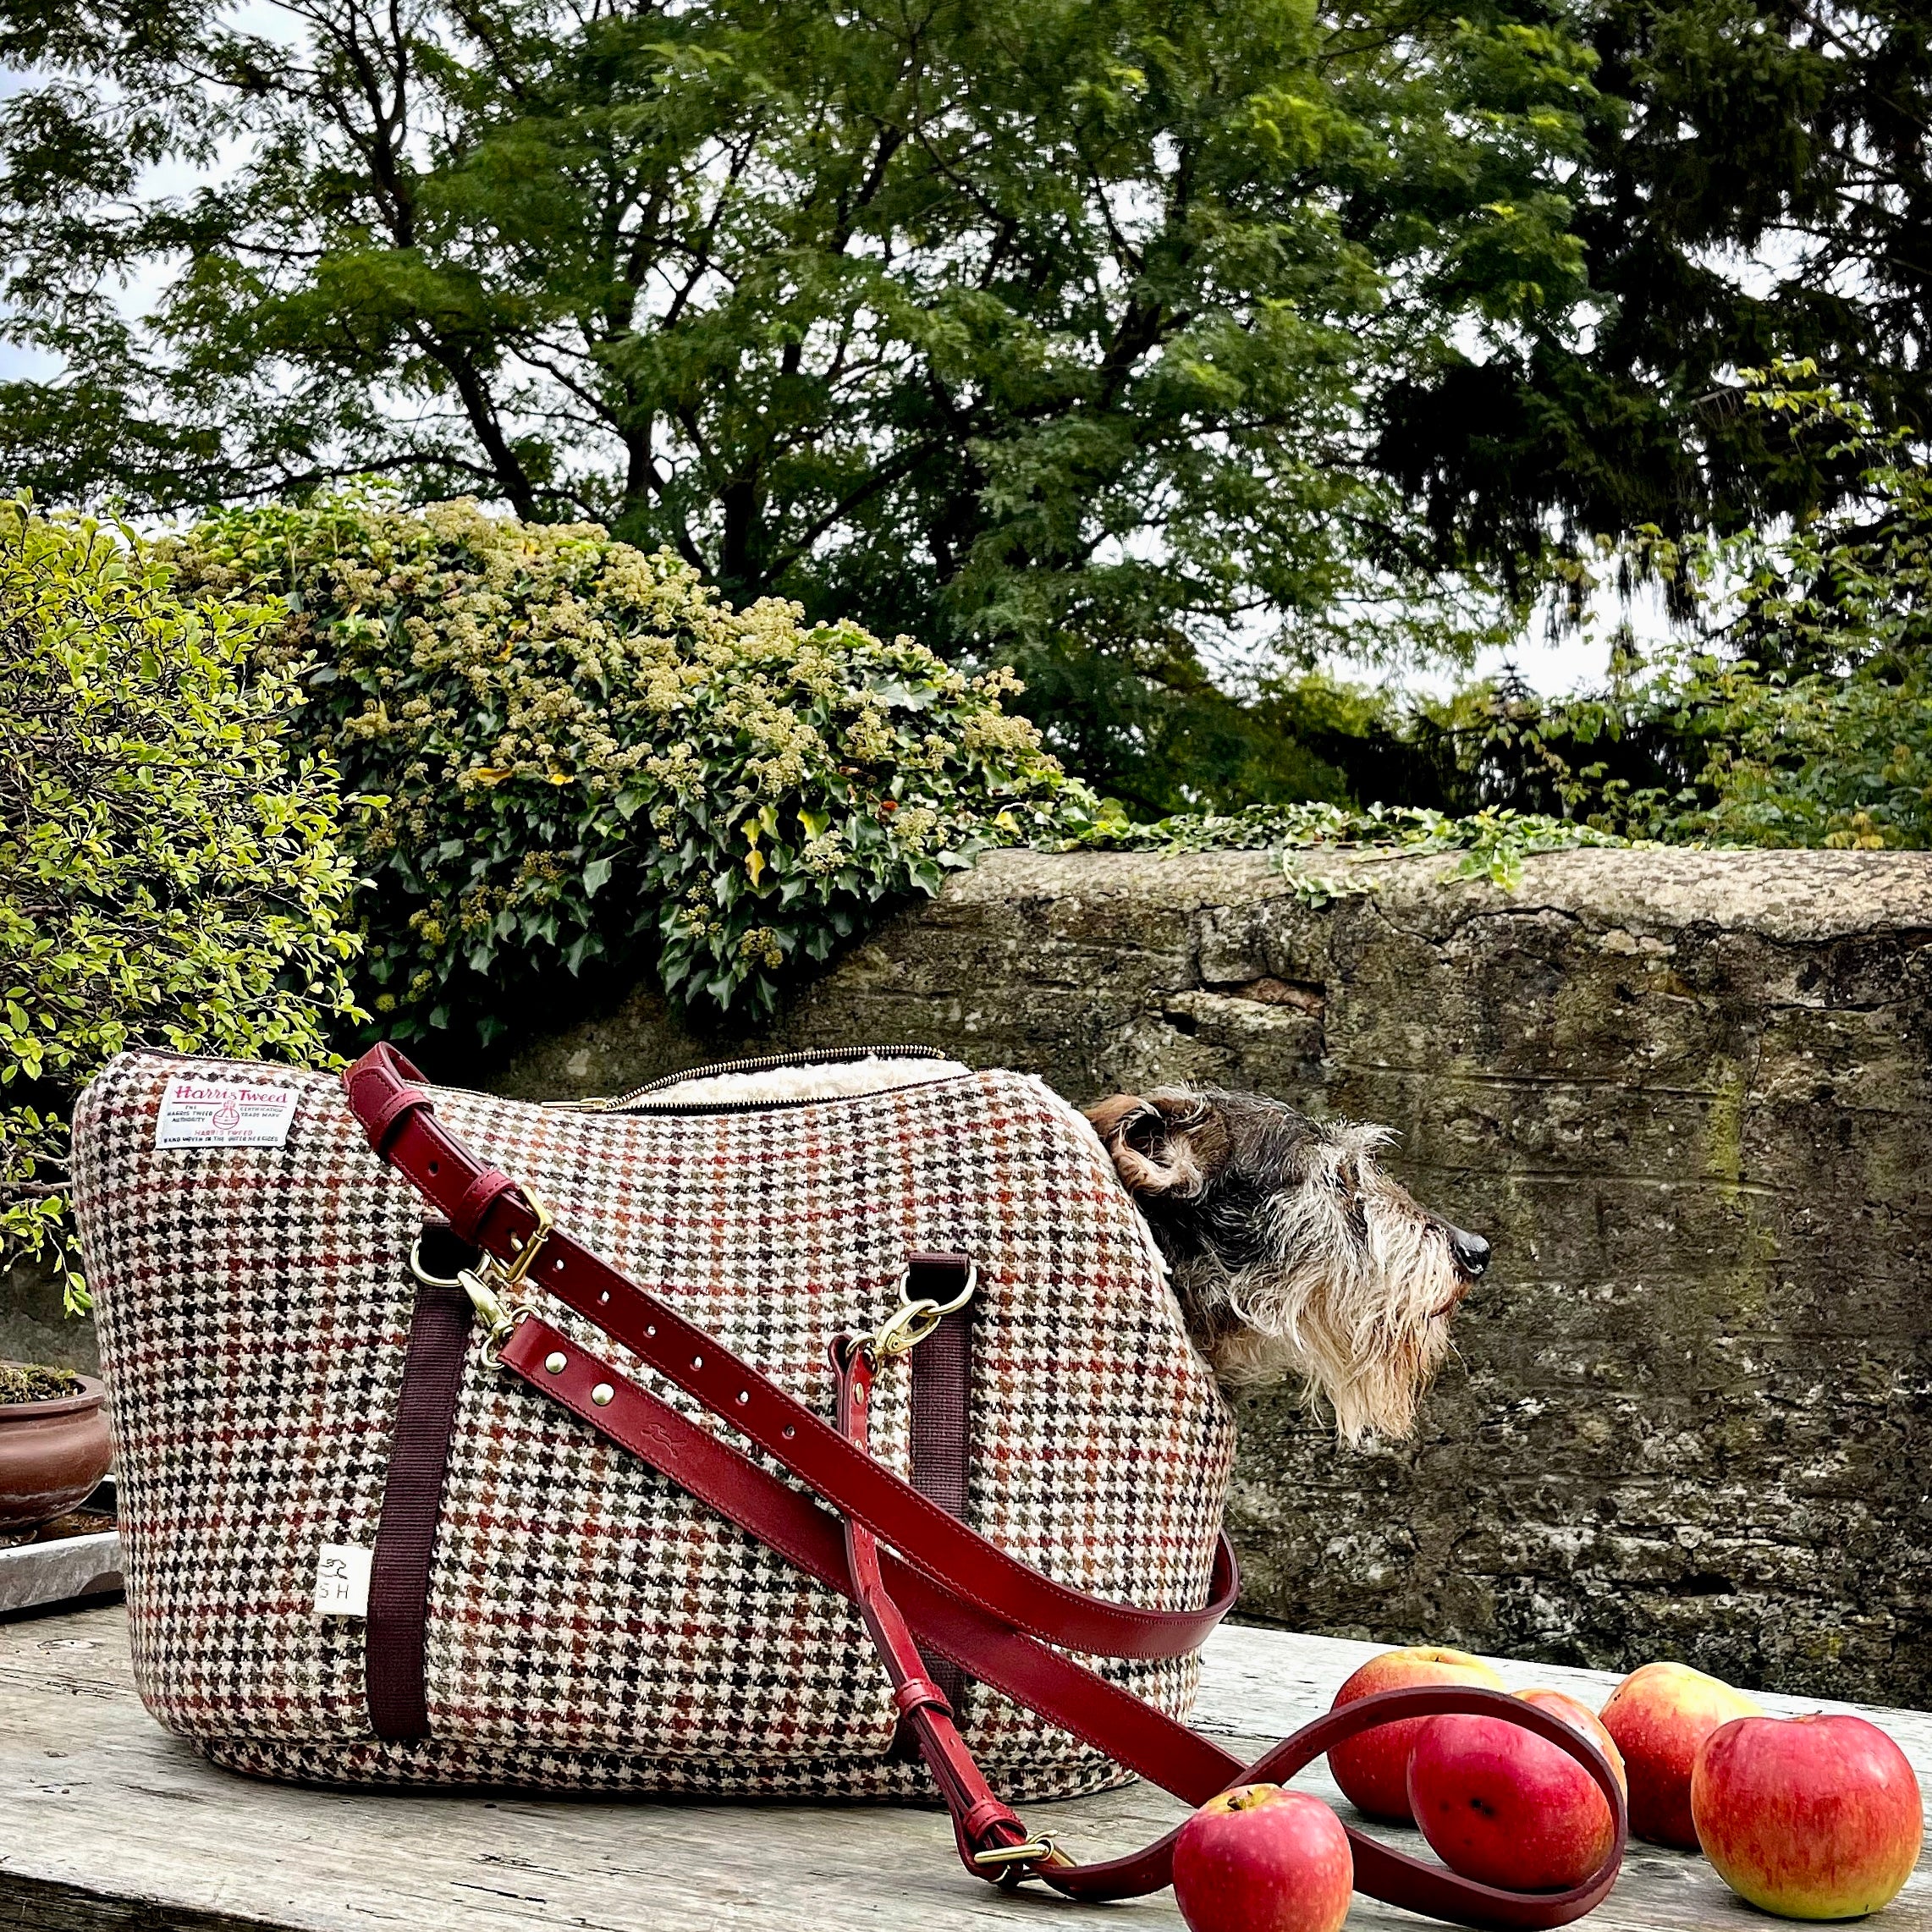 WHAT MAKES OUR SUSTAINABLE LUXURY DOG CARRIER & PET TRAVEL BED TRULY SPECIAL?